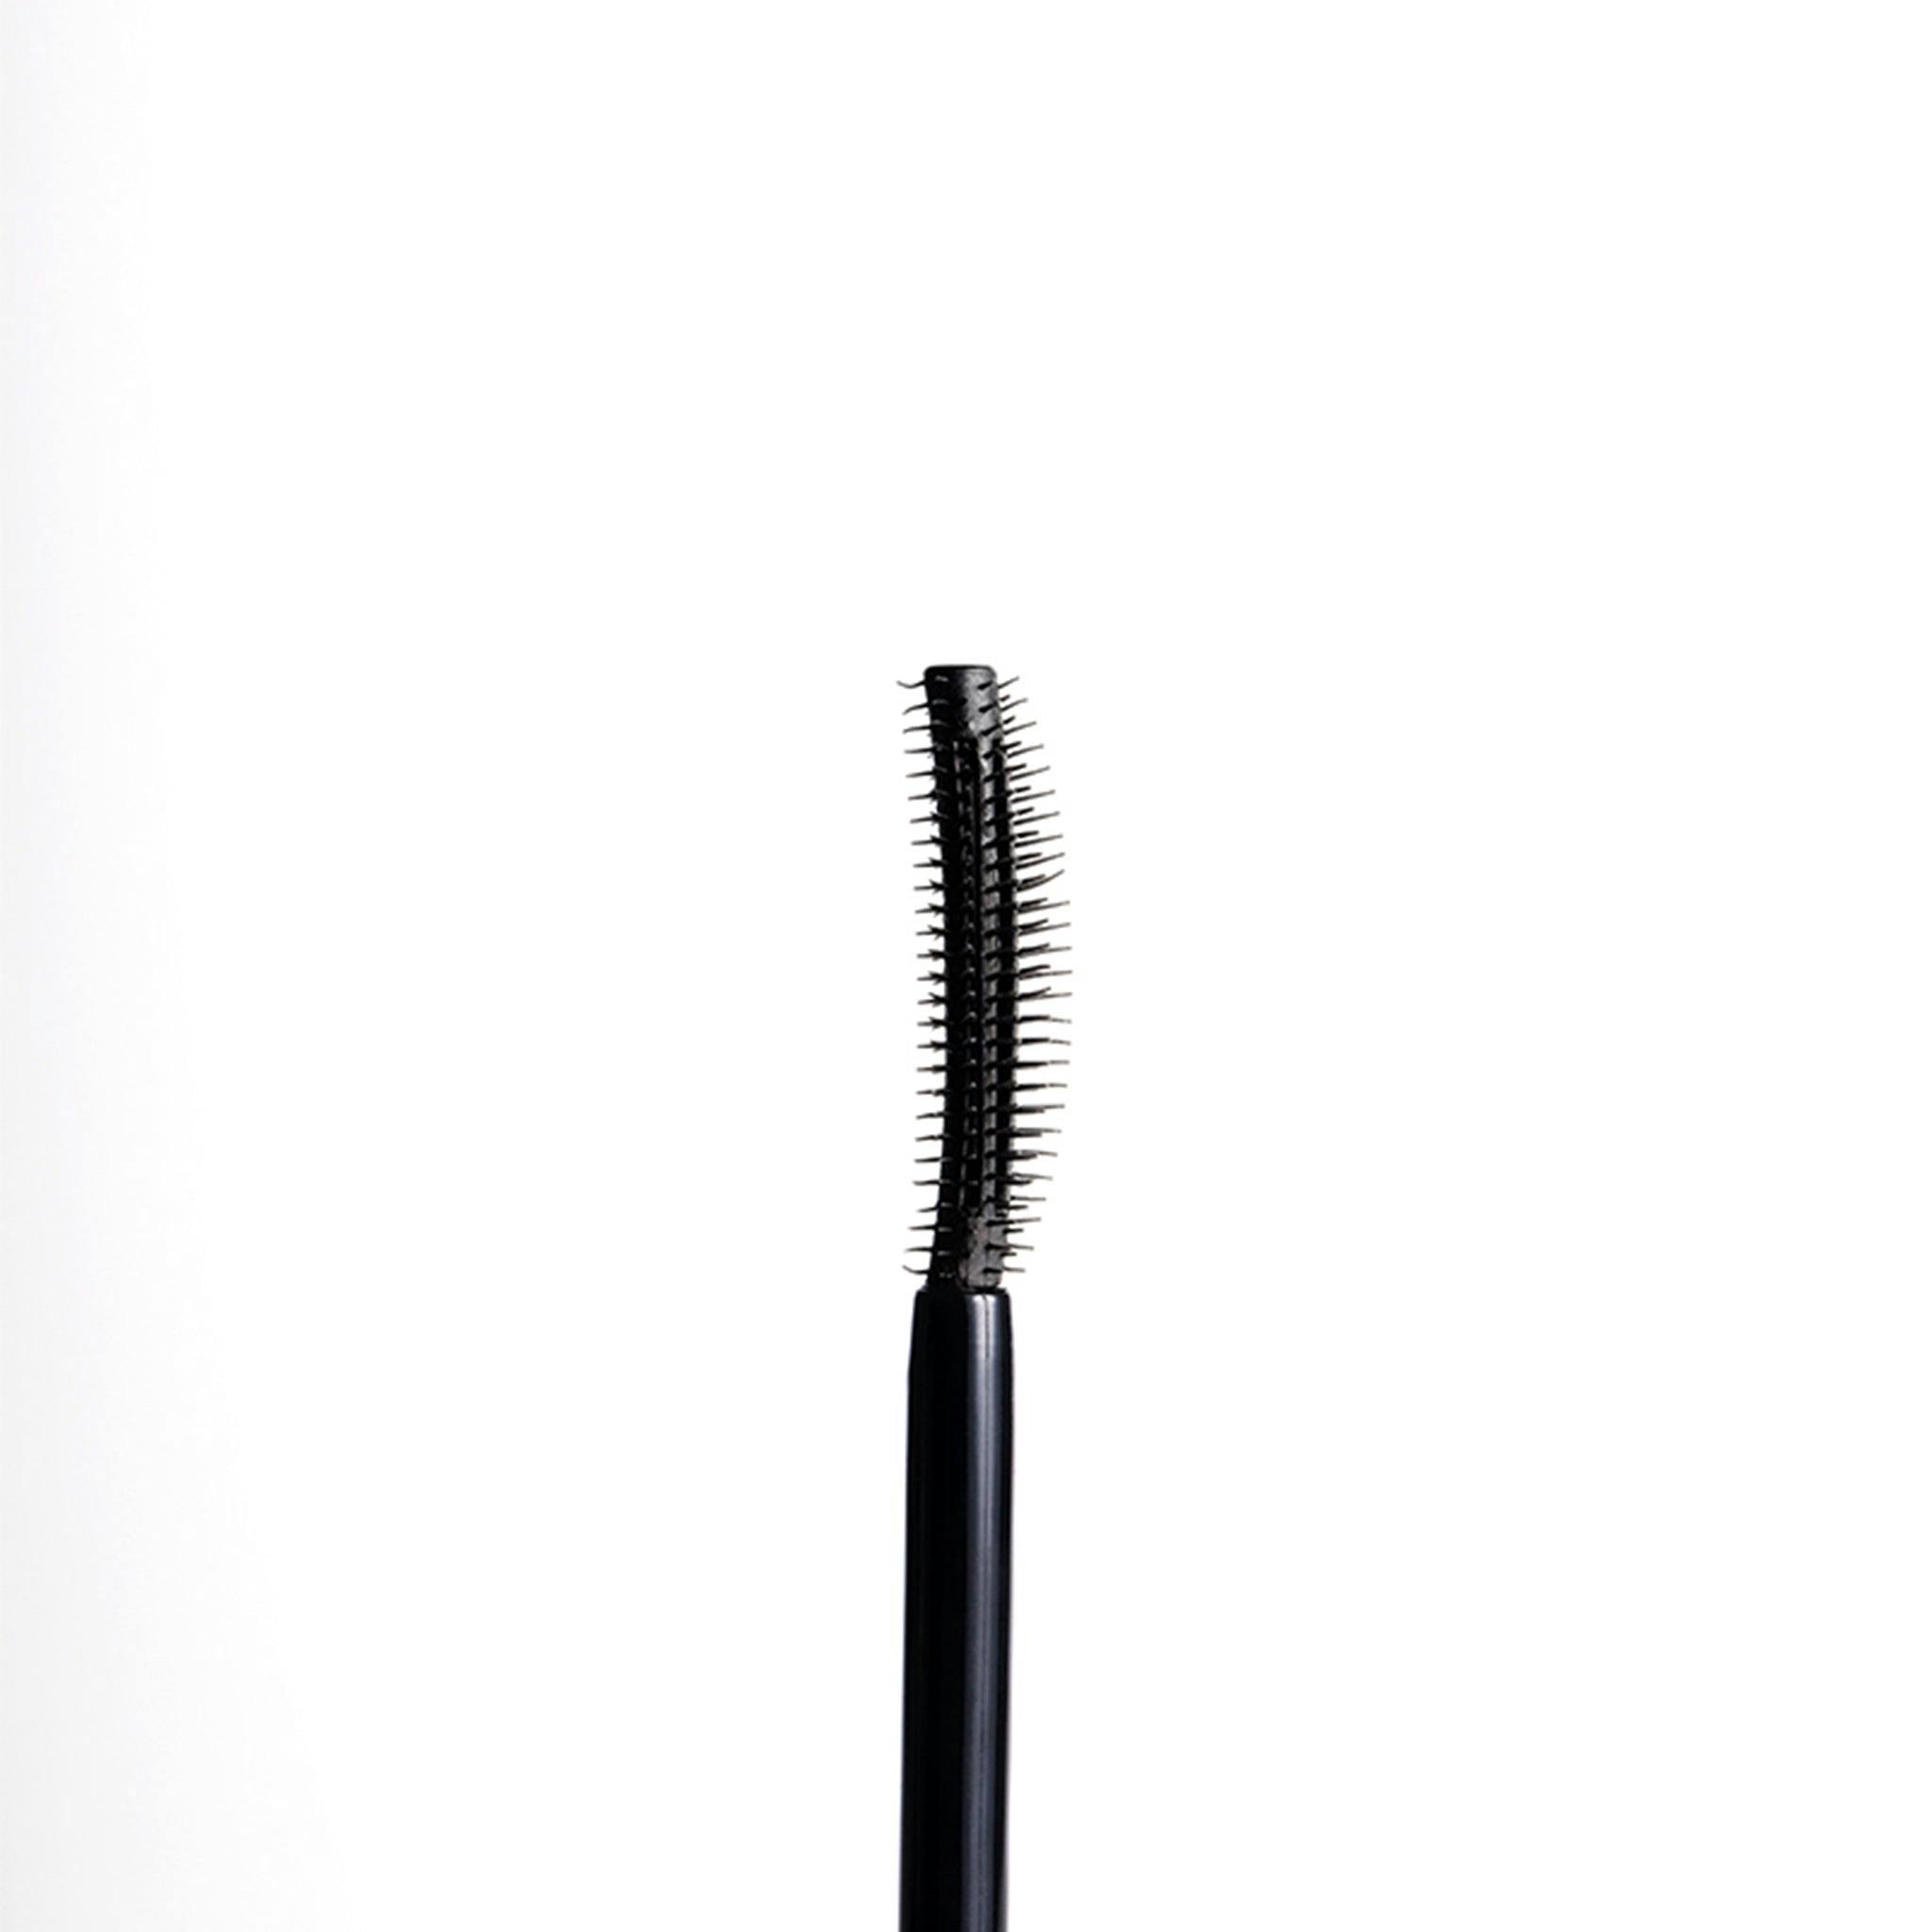 Curling Champ Mascara for petite